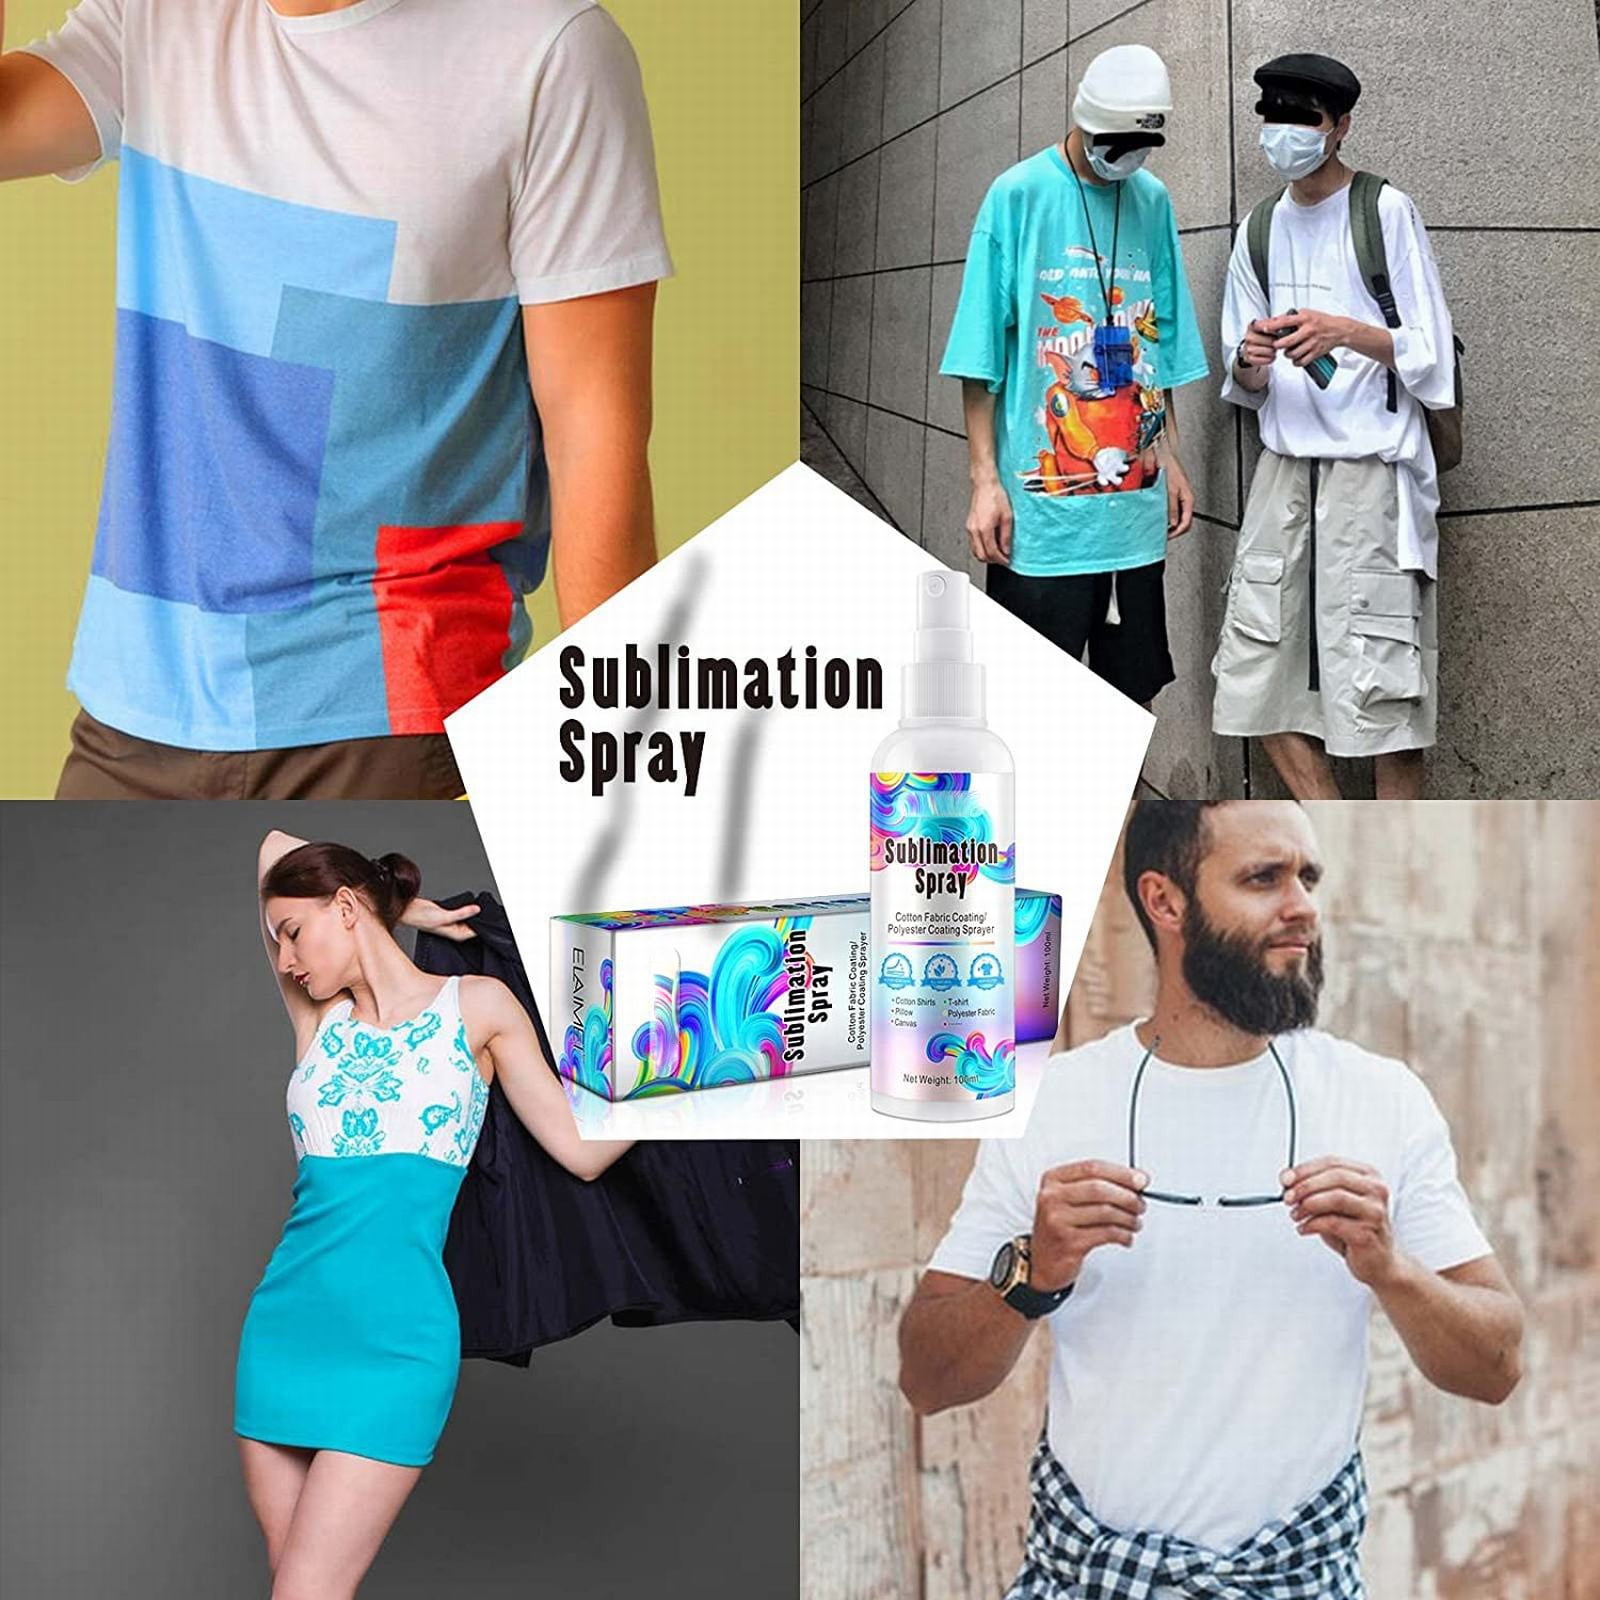 Spray Bright - Non-Toxic Sublimation Spray - Easy Sublimation on 100%  Cotton and All Polyester counts - Brighter Sublimation